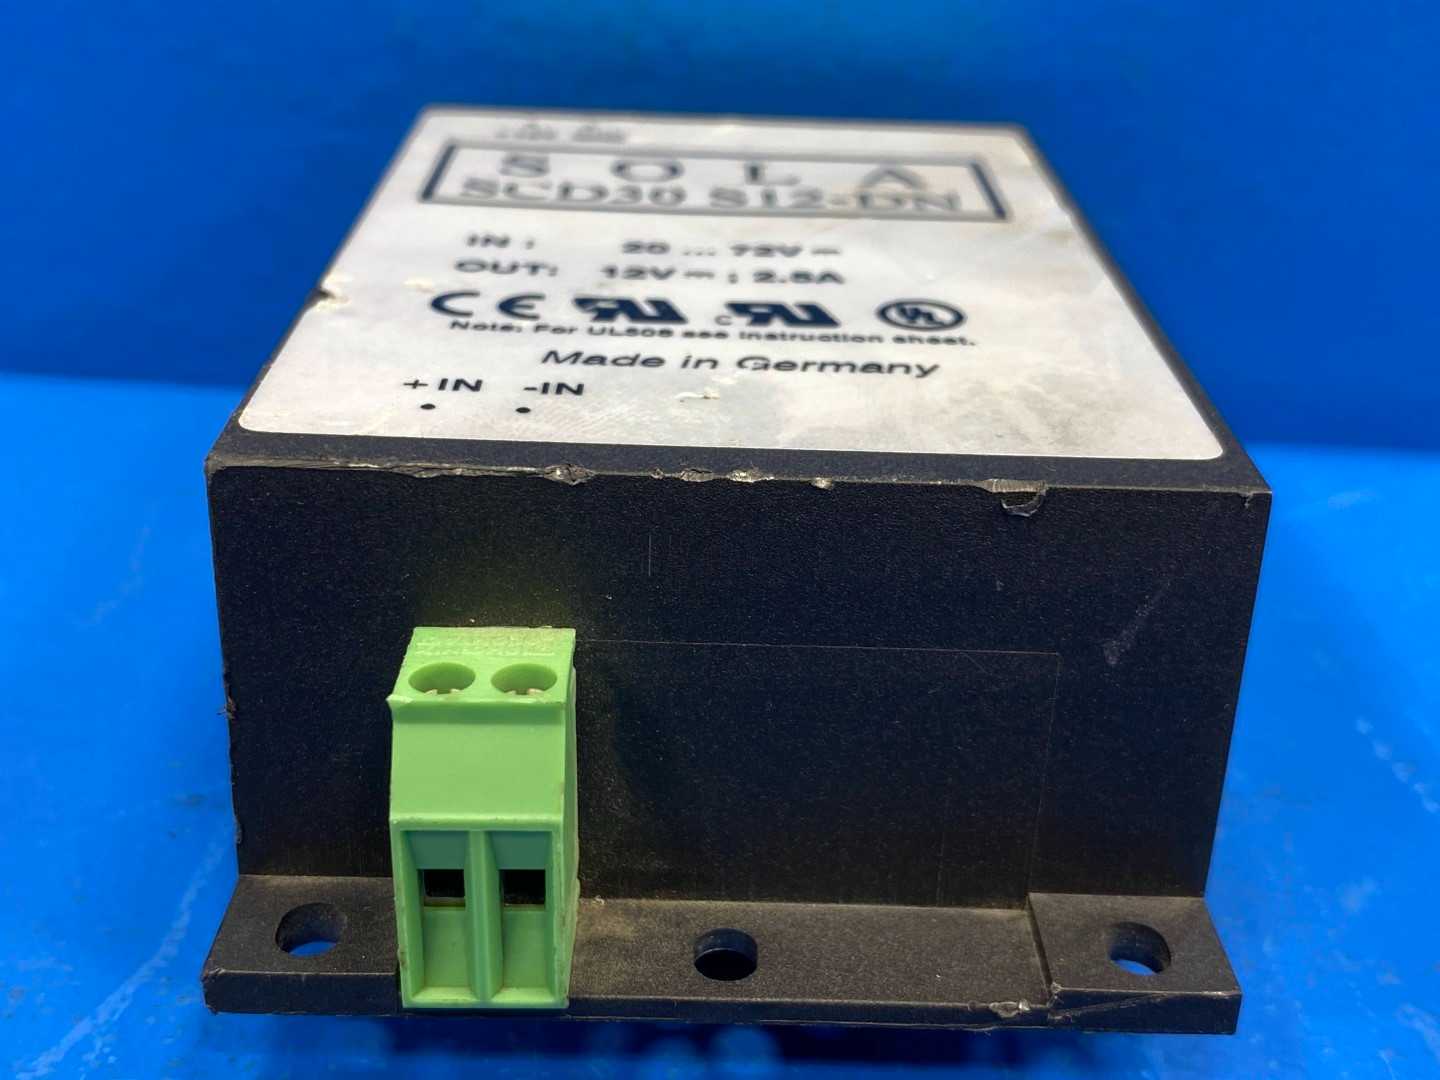 SOLA Industrial Converter SCD30 S12-DN Rail/Chassis 20-72V